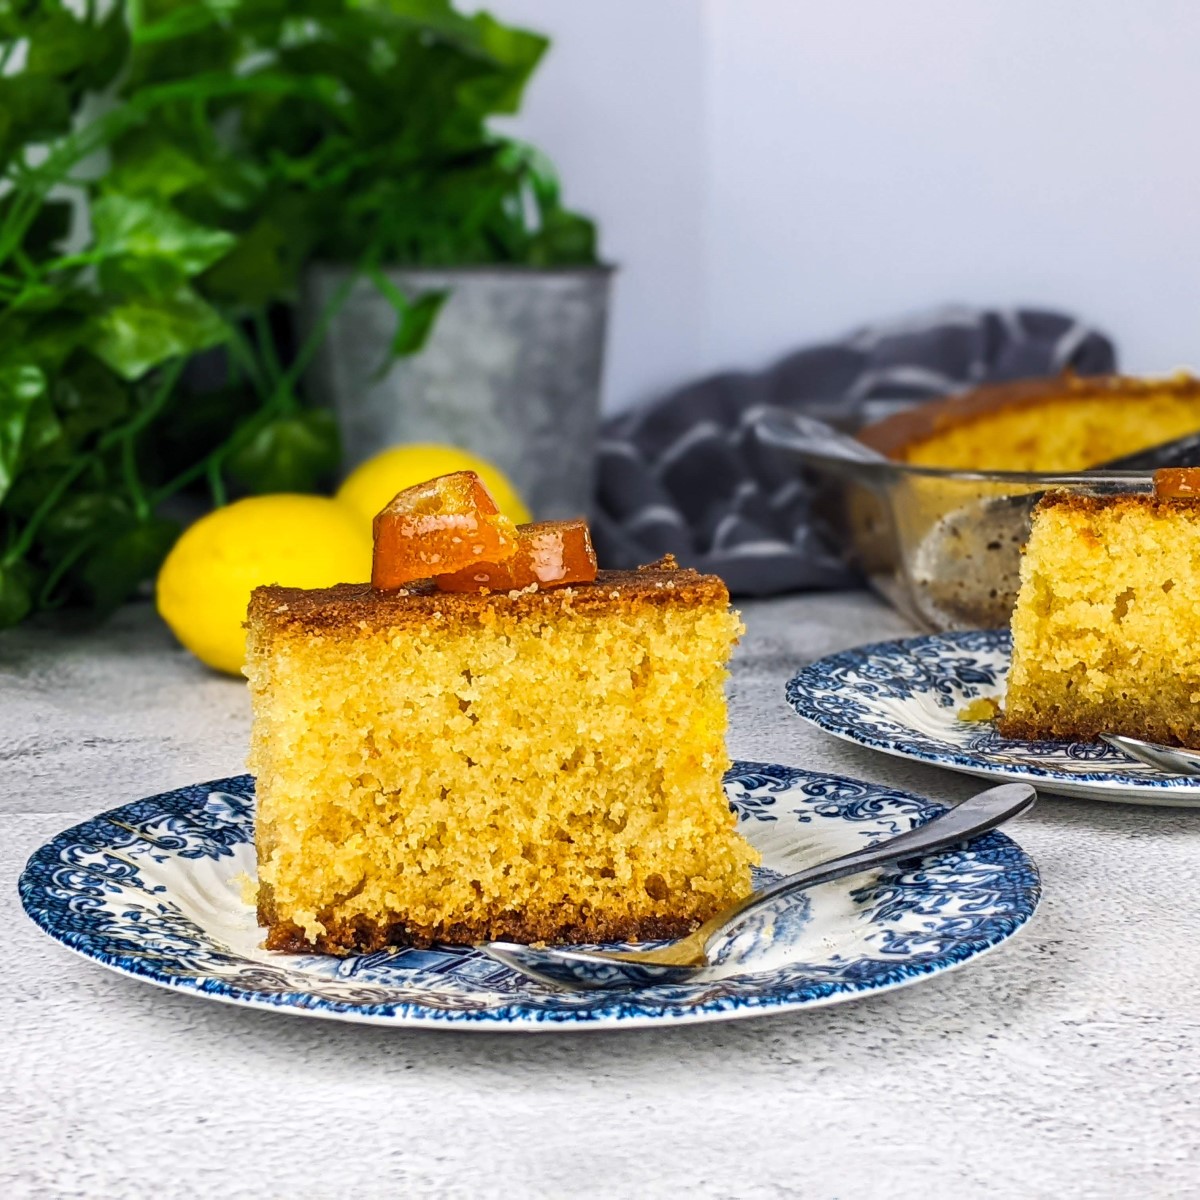 Slice of ravani cake on a plate with lemons and tray of ravani at the back.